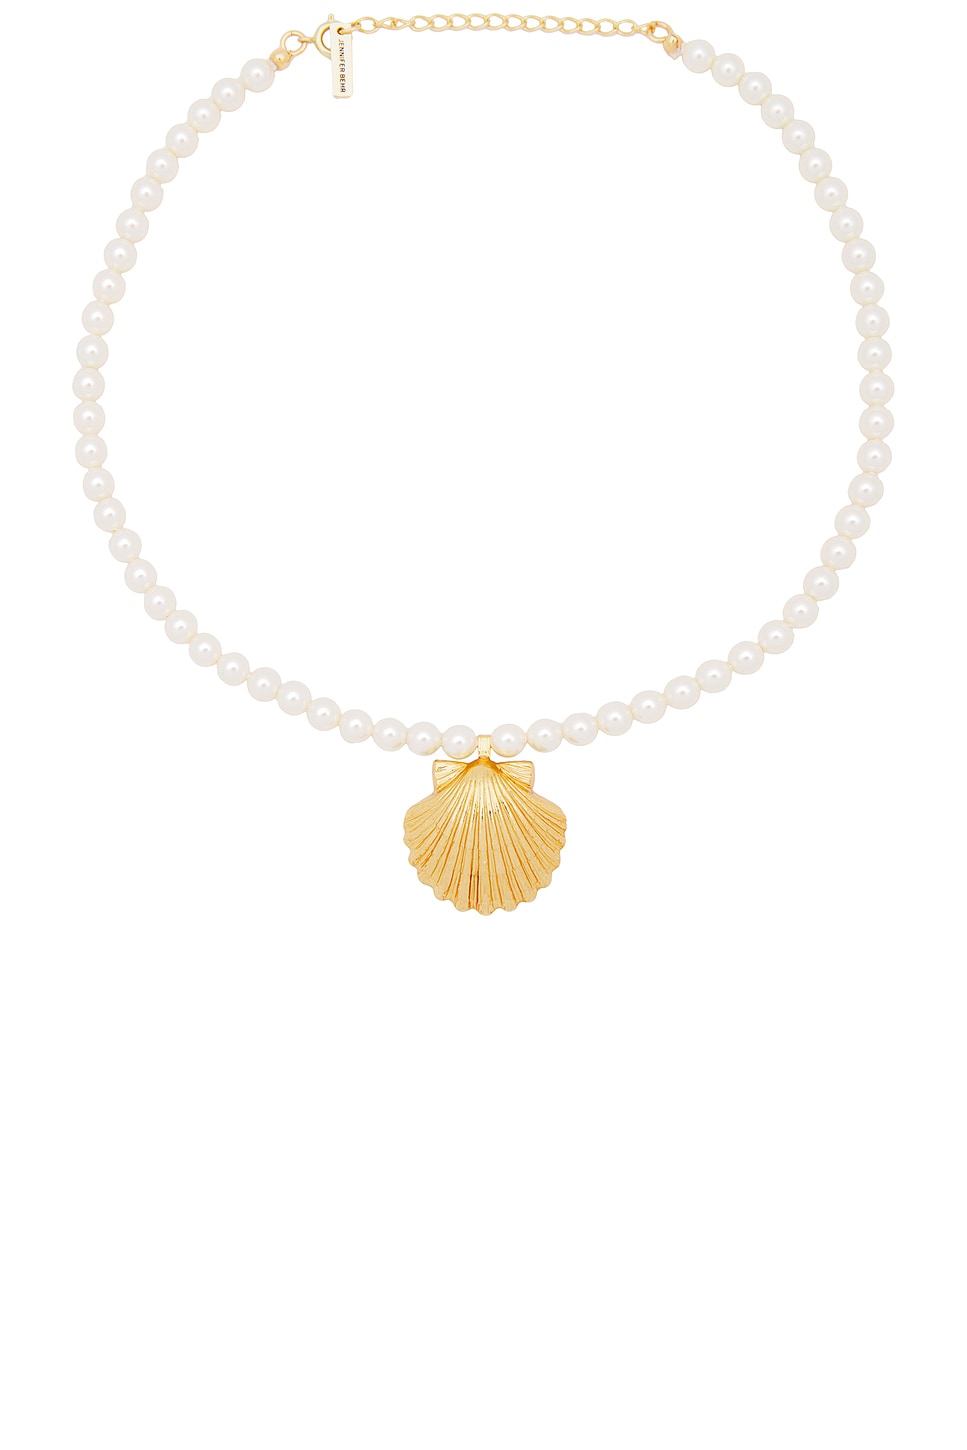 Image 1 of Jennifer Behr Siren Necklace in Gold Pearl